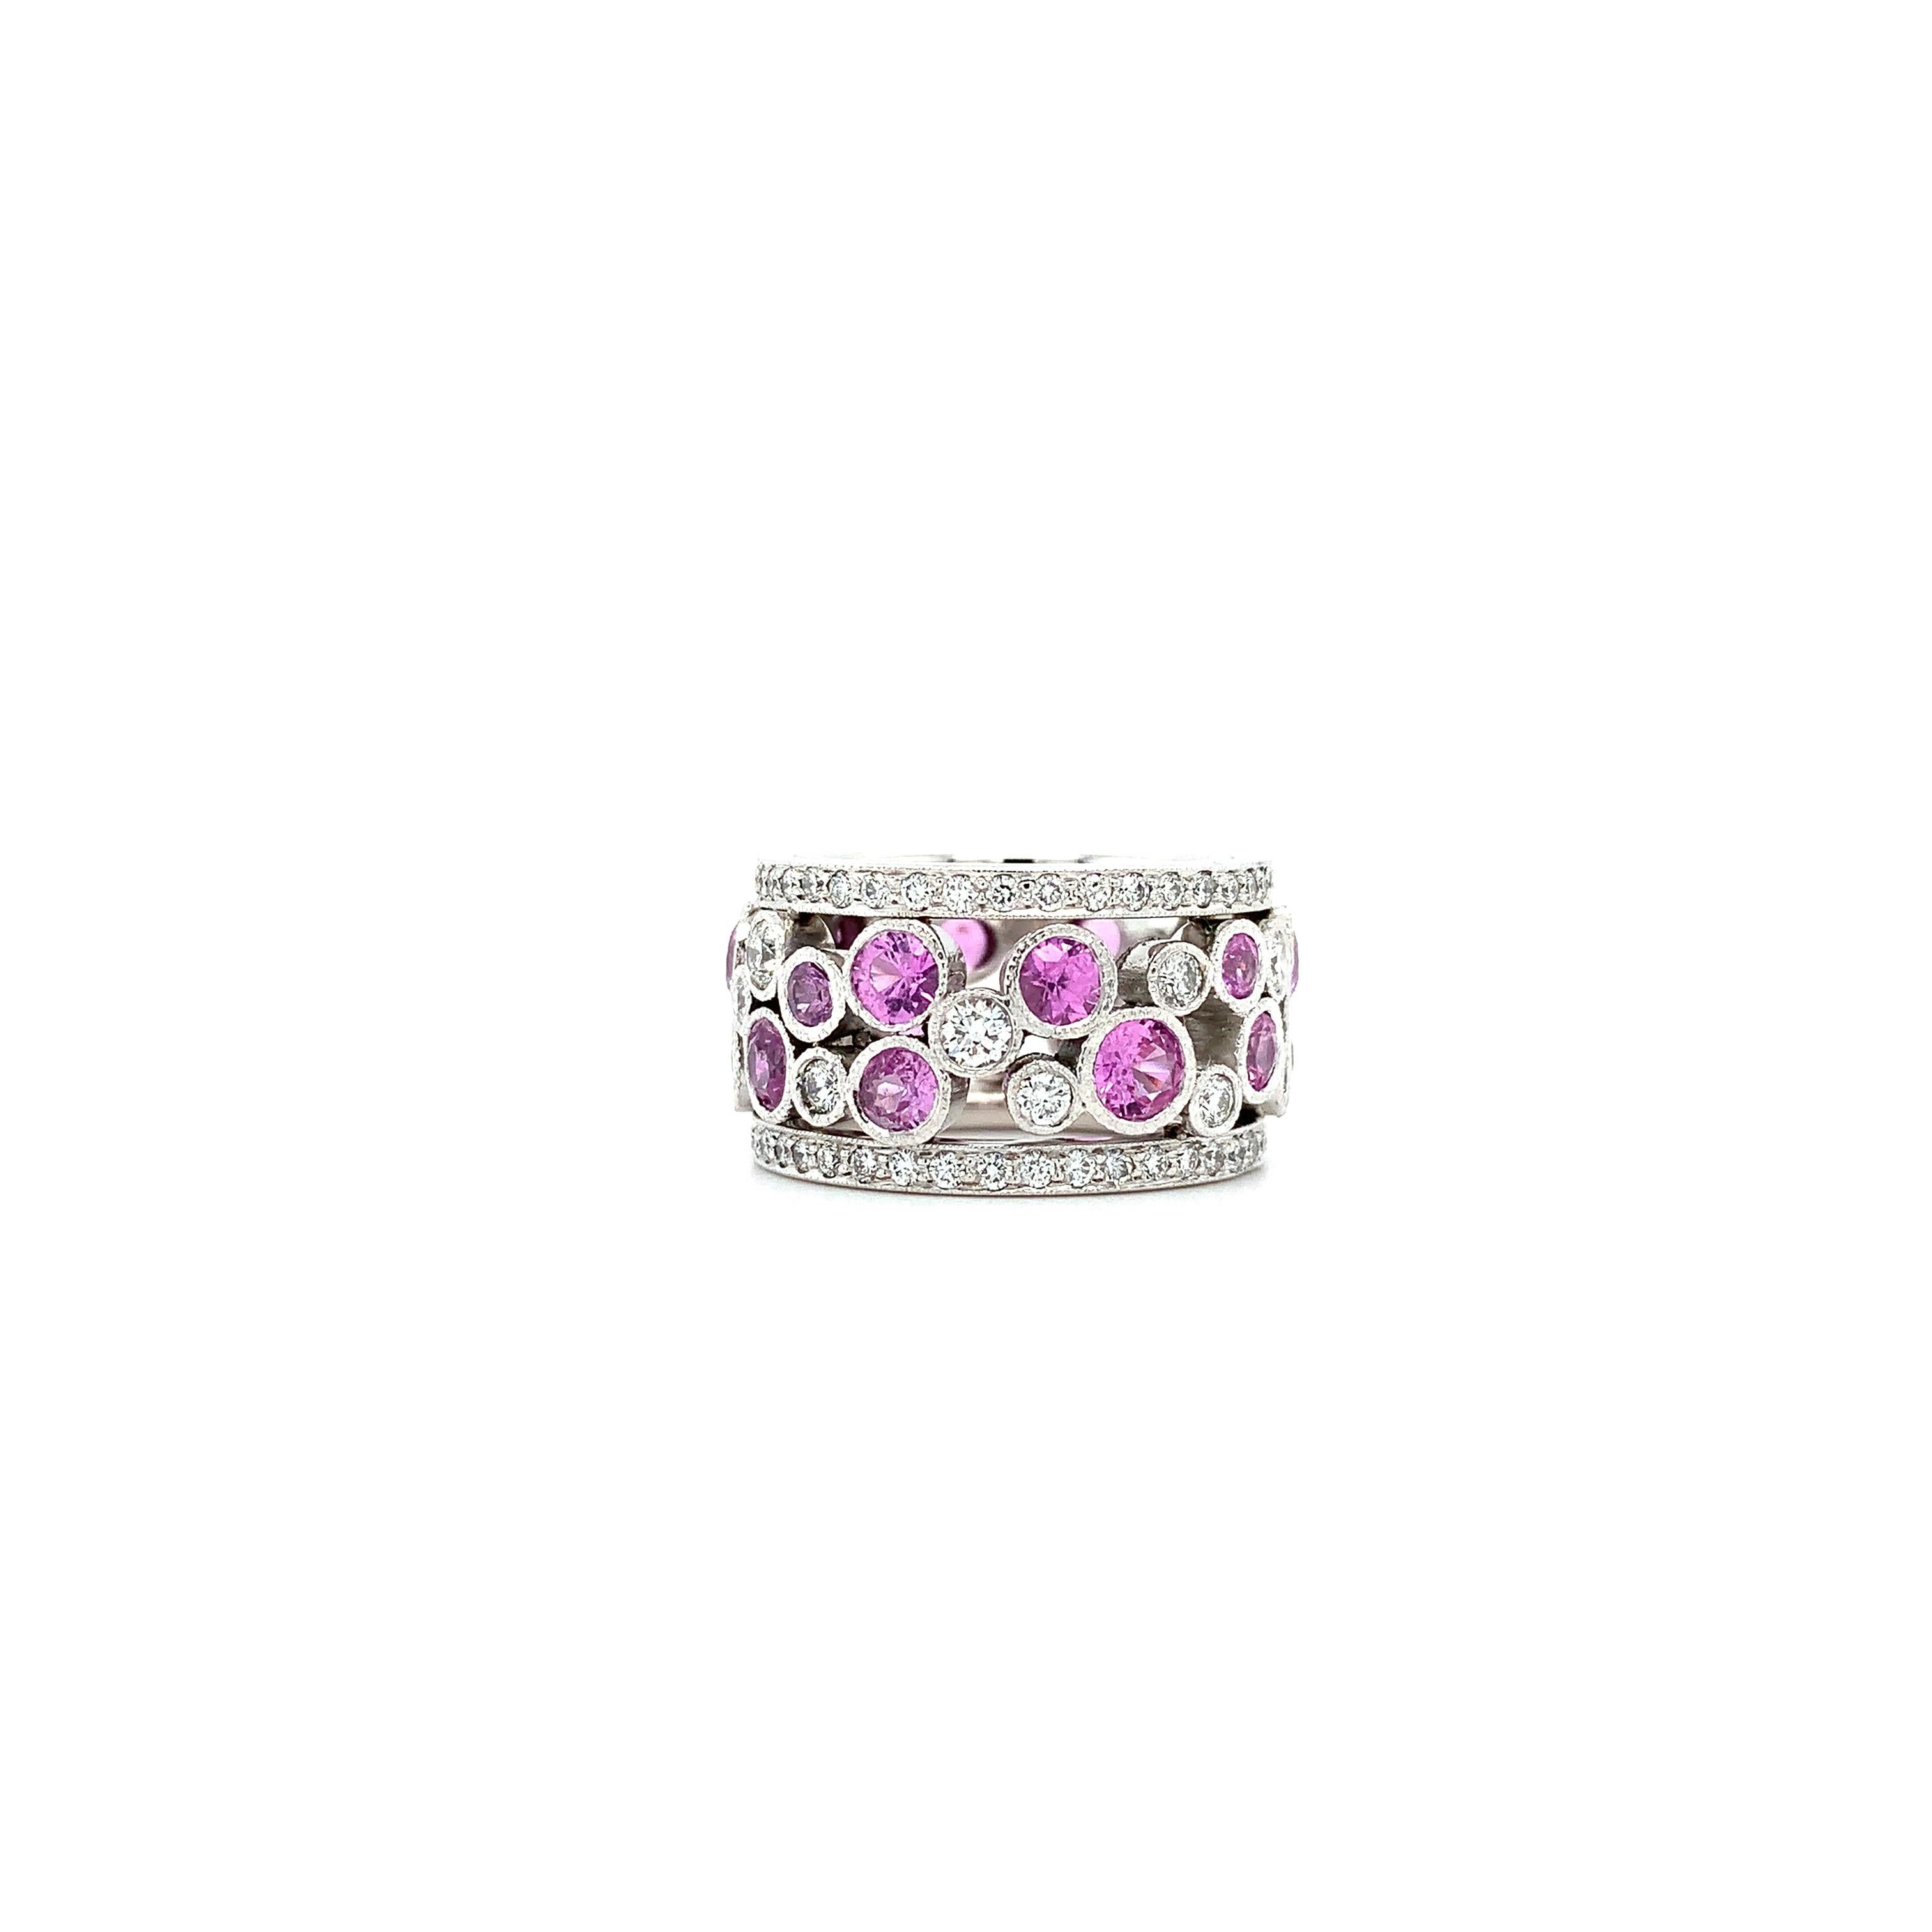 7.30ct Pink sapphire and round brilliant diamond cocktail ring in 18k white gold.
Featuring the elegant shade of pink sapphire Ceylon origin accented with round brilliant cut diamonds all the way around all mounted in 18k precious white gold.
Size